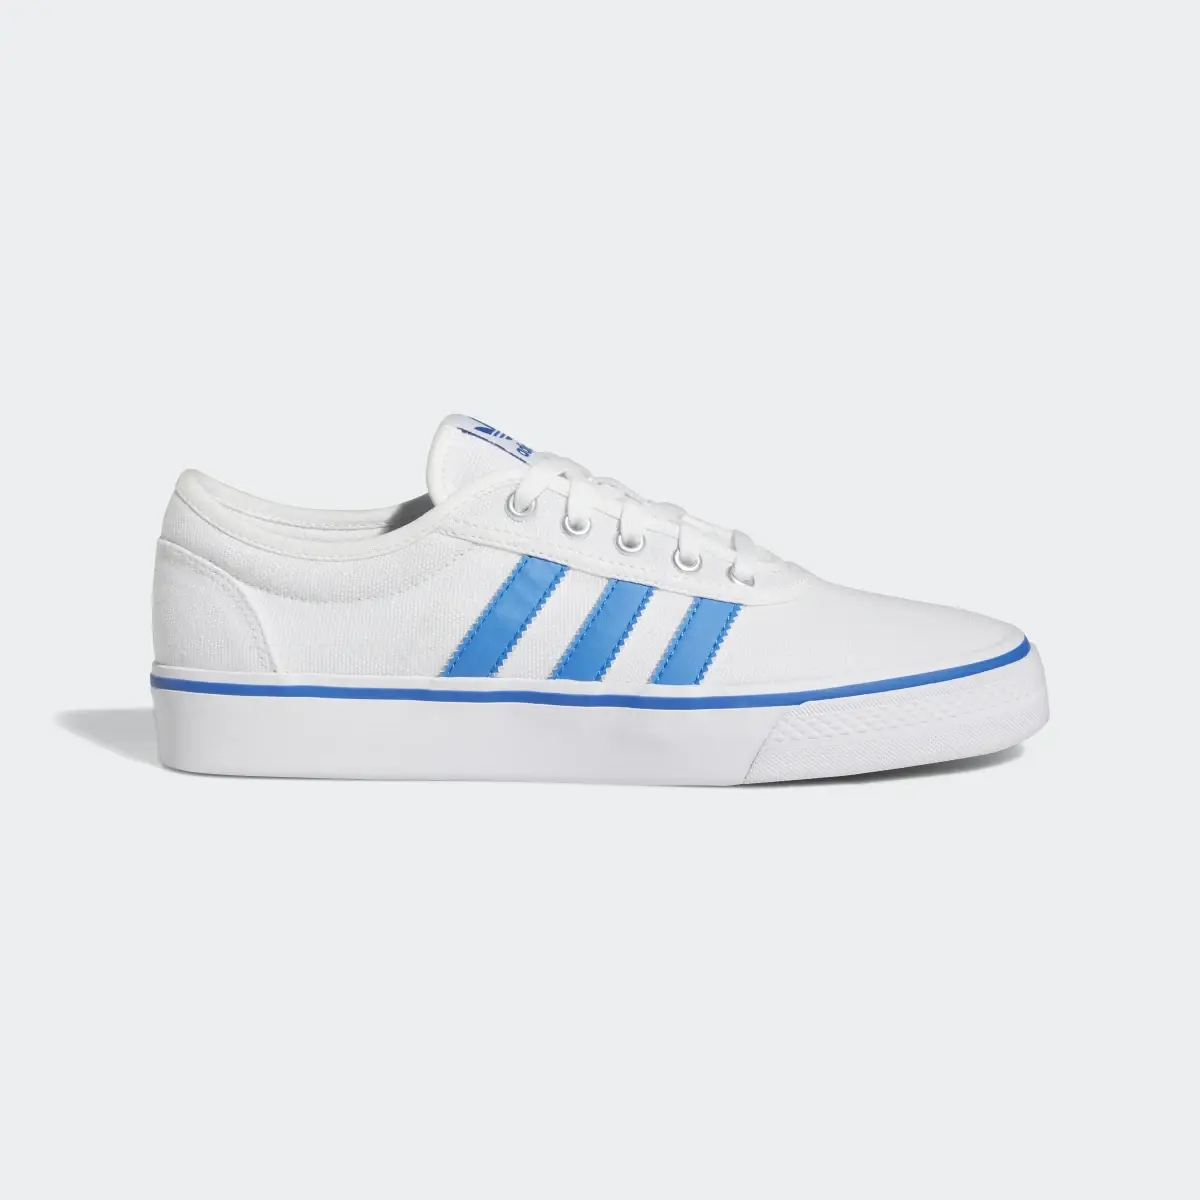 Adidas Adiease Shoes. 2